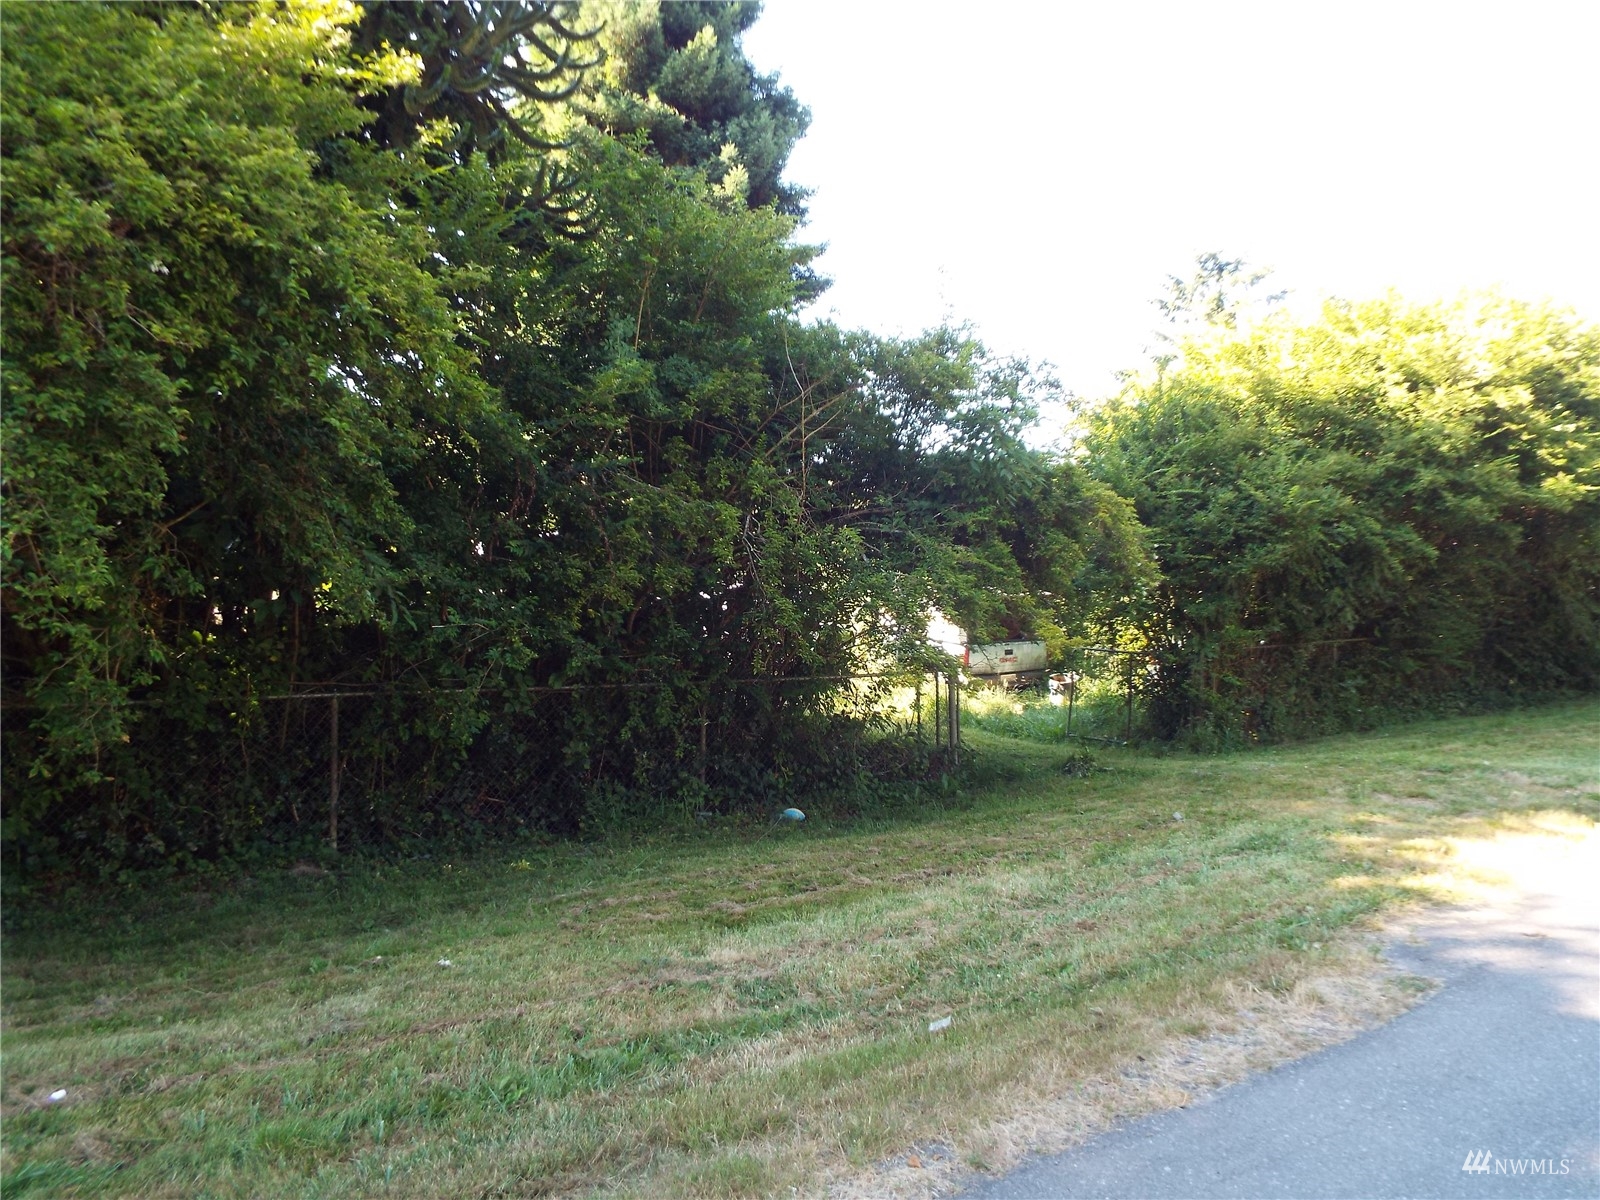 a view of a yard with green space